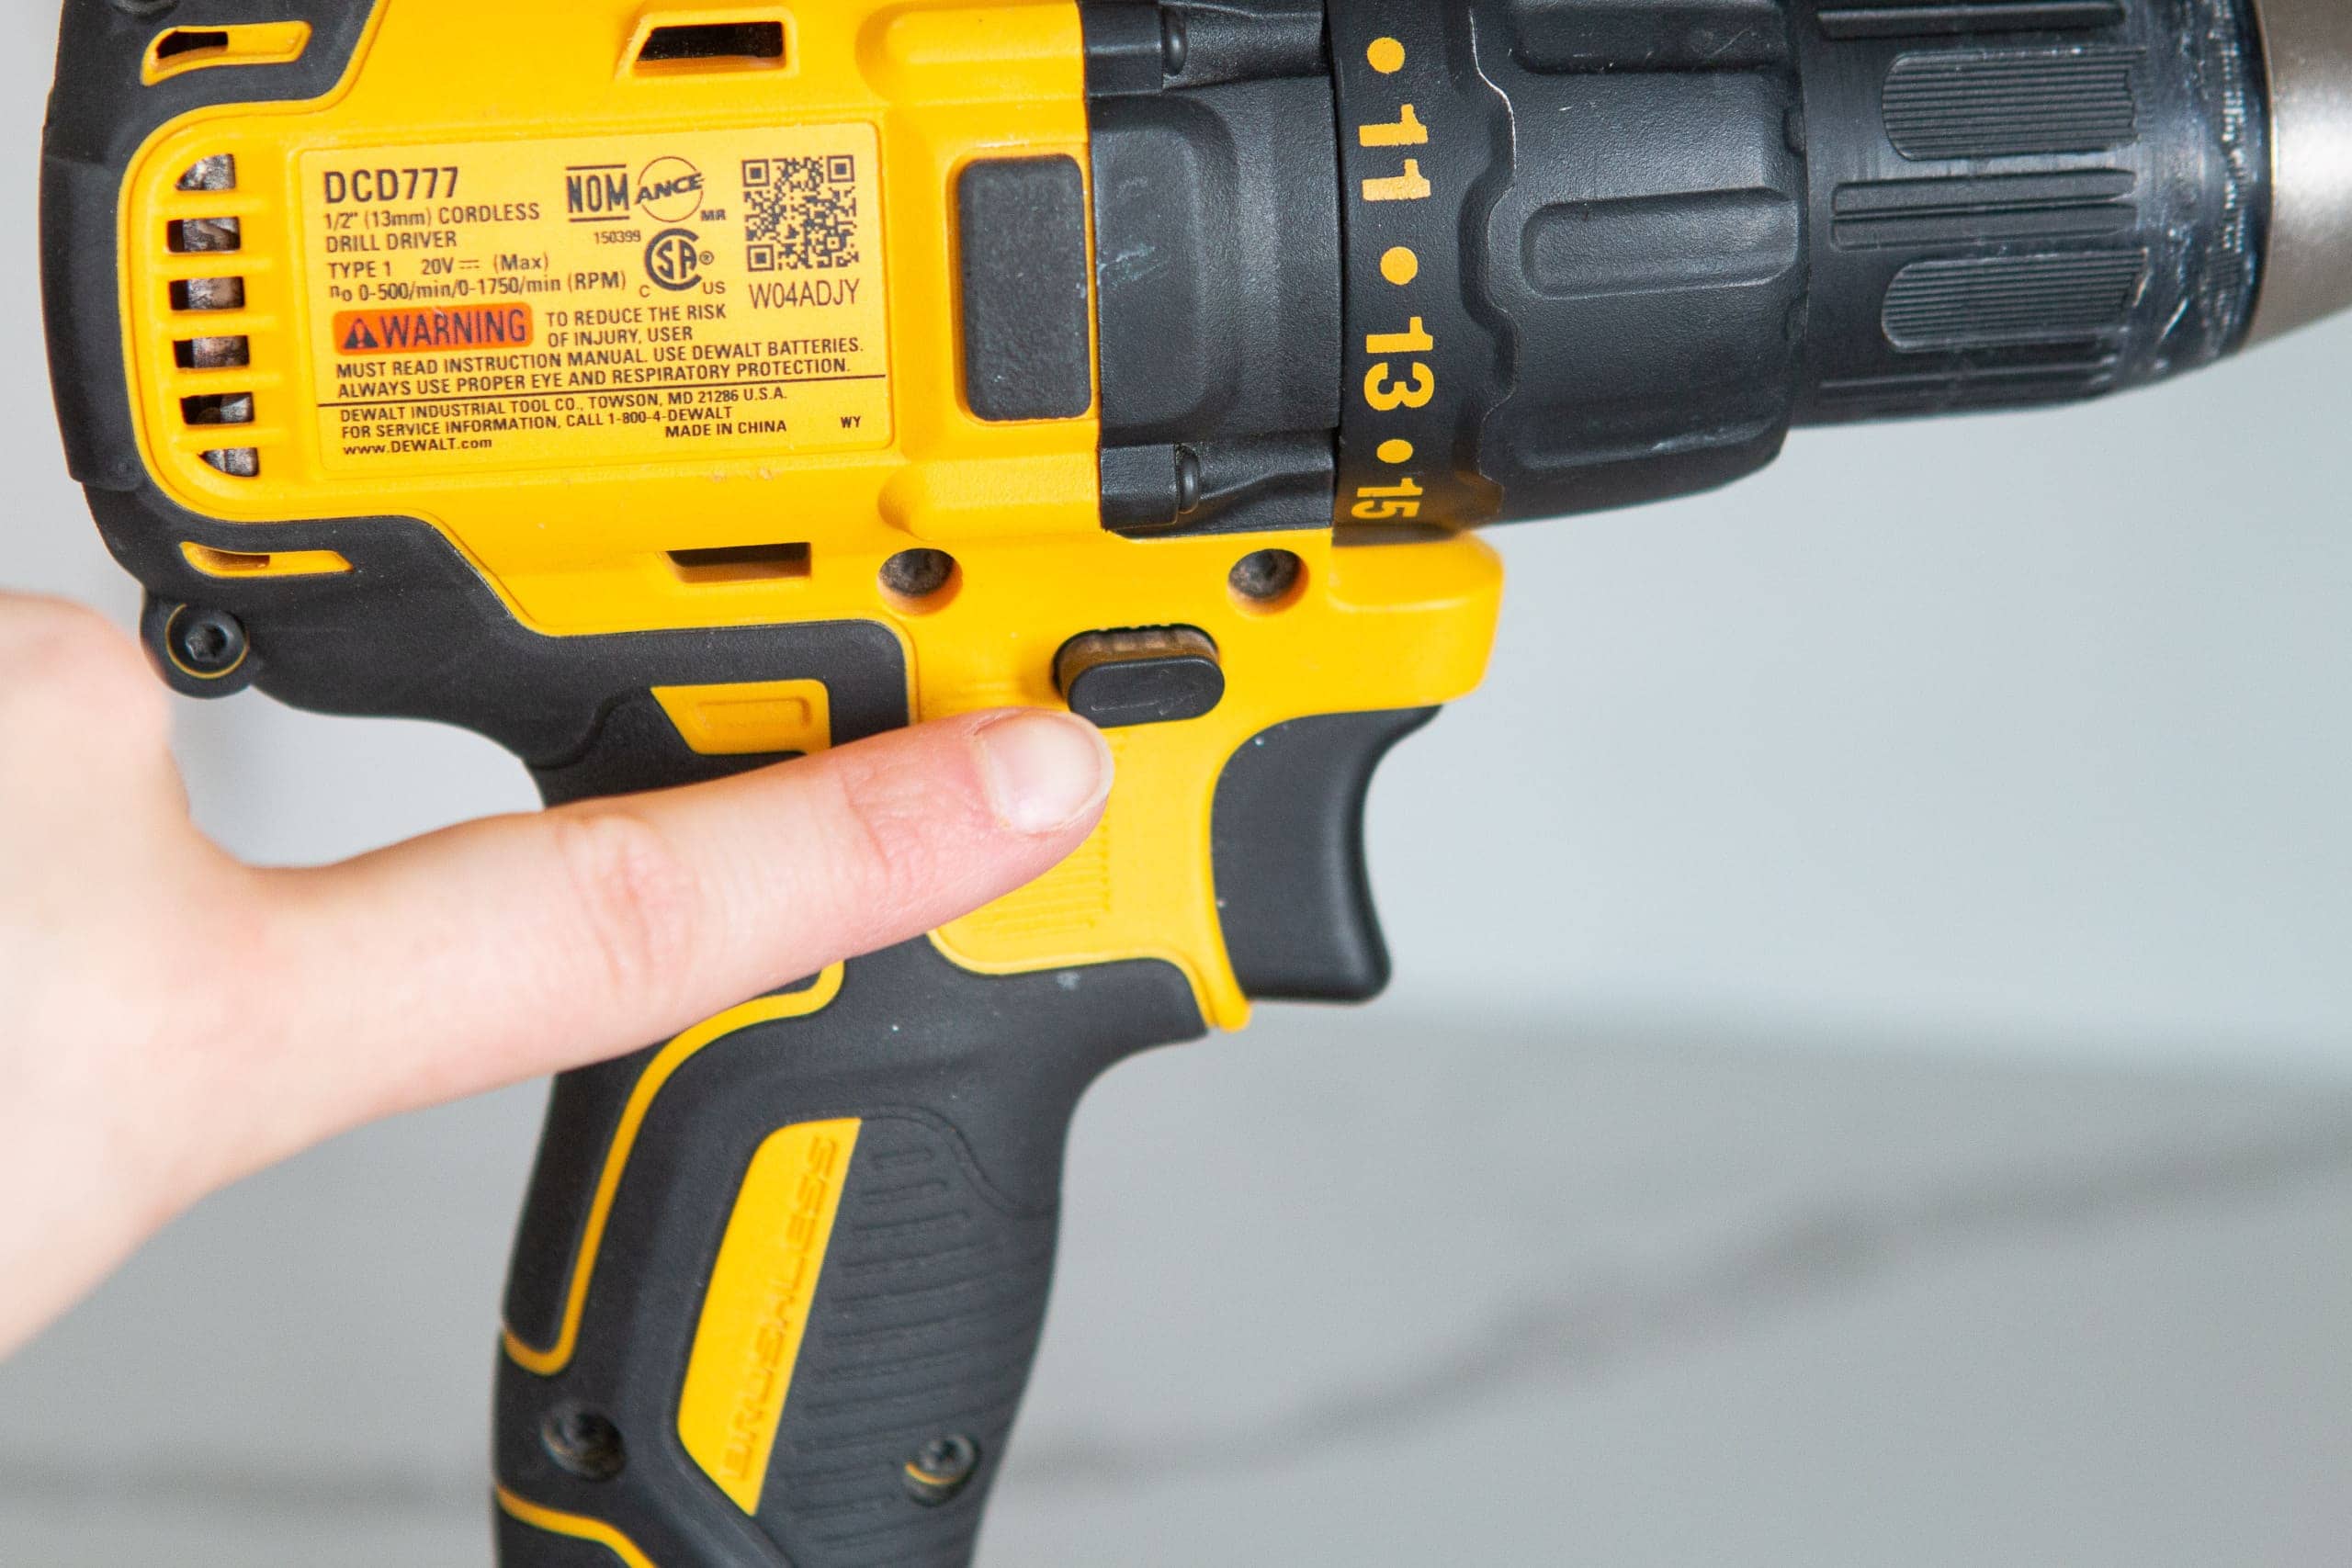 The forward and reverse button the power drill